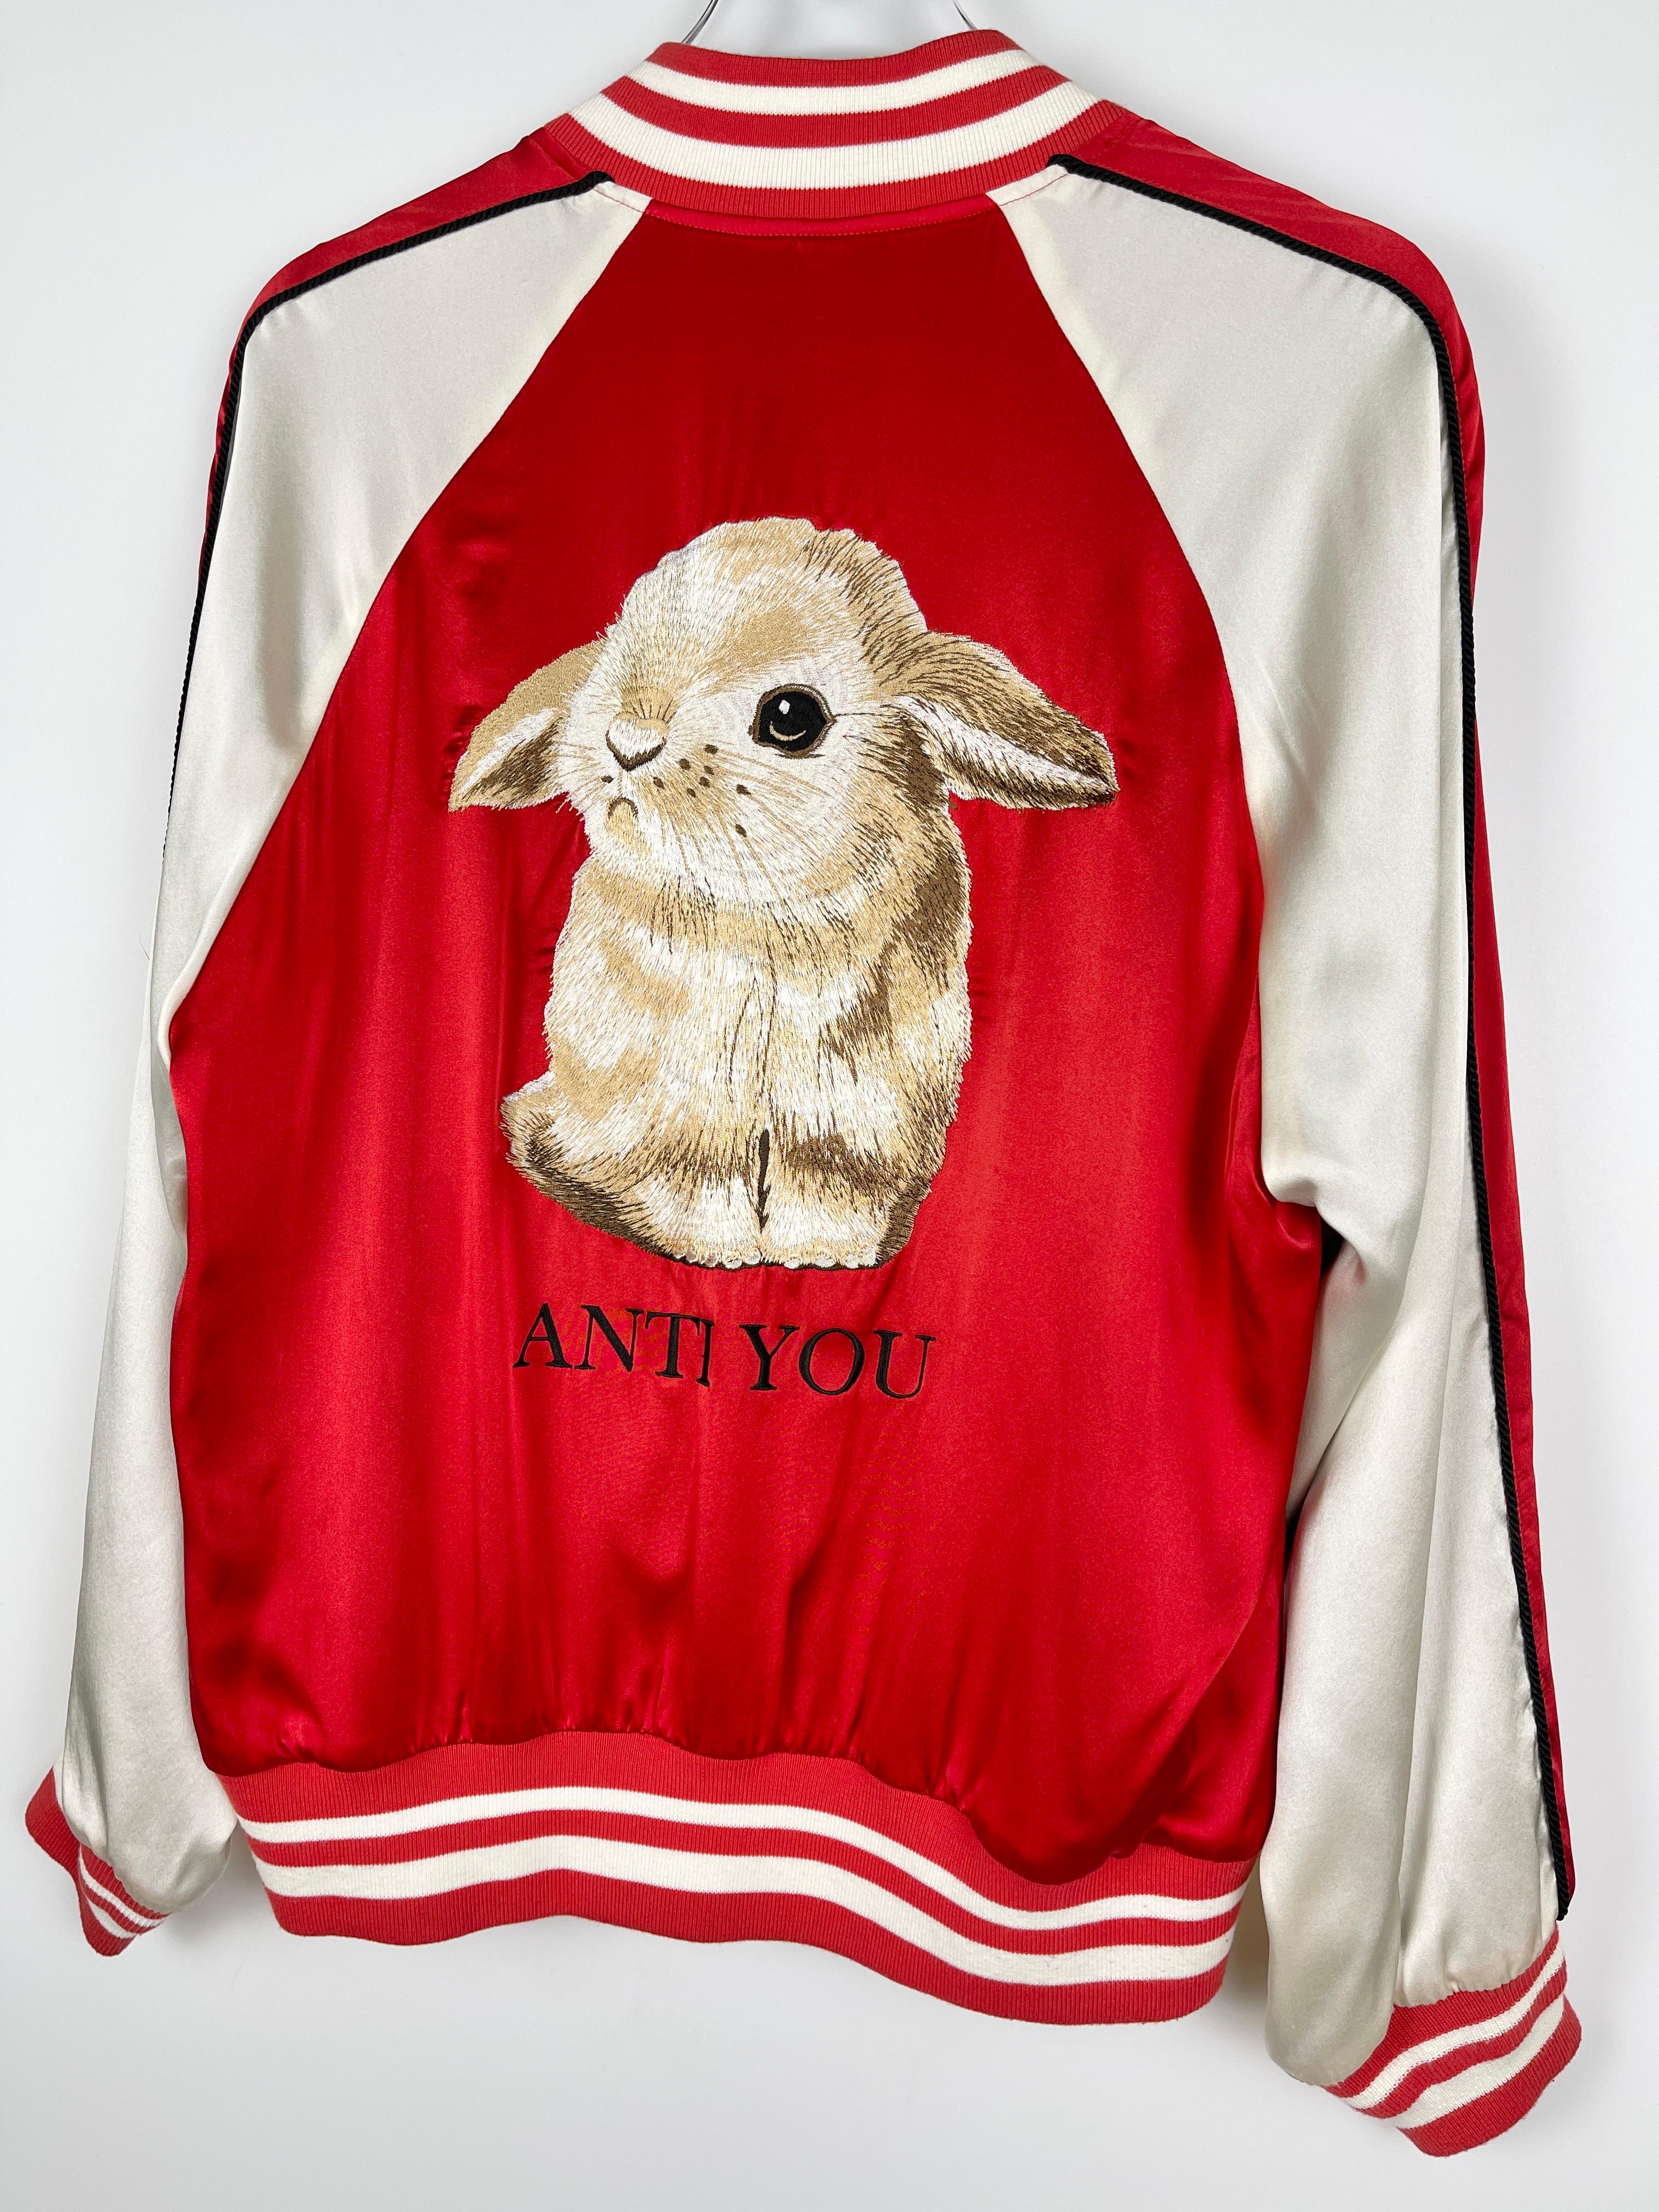 Undercover S/S2023 Anti-you Rabbit Bomber Jacket For Sale 5